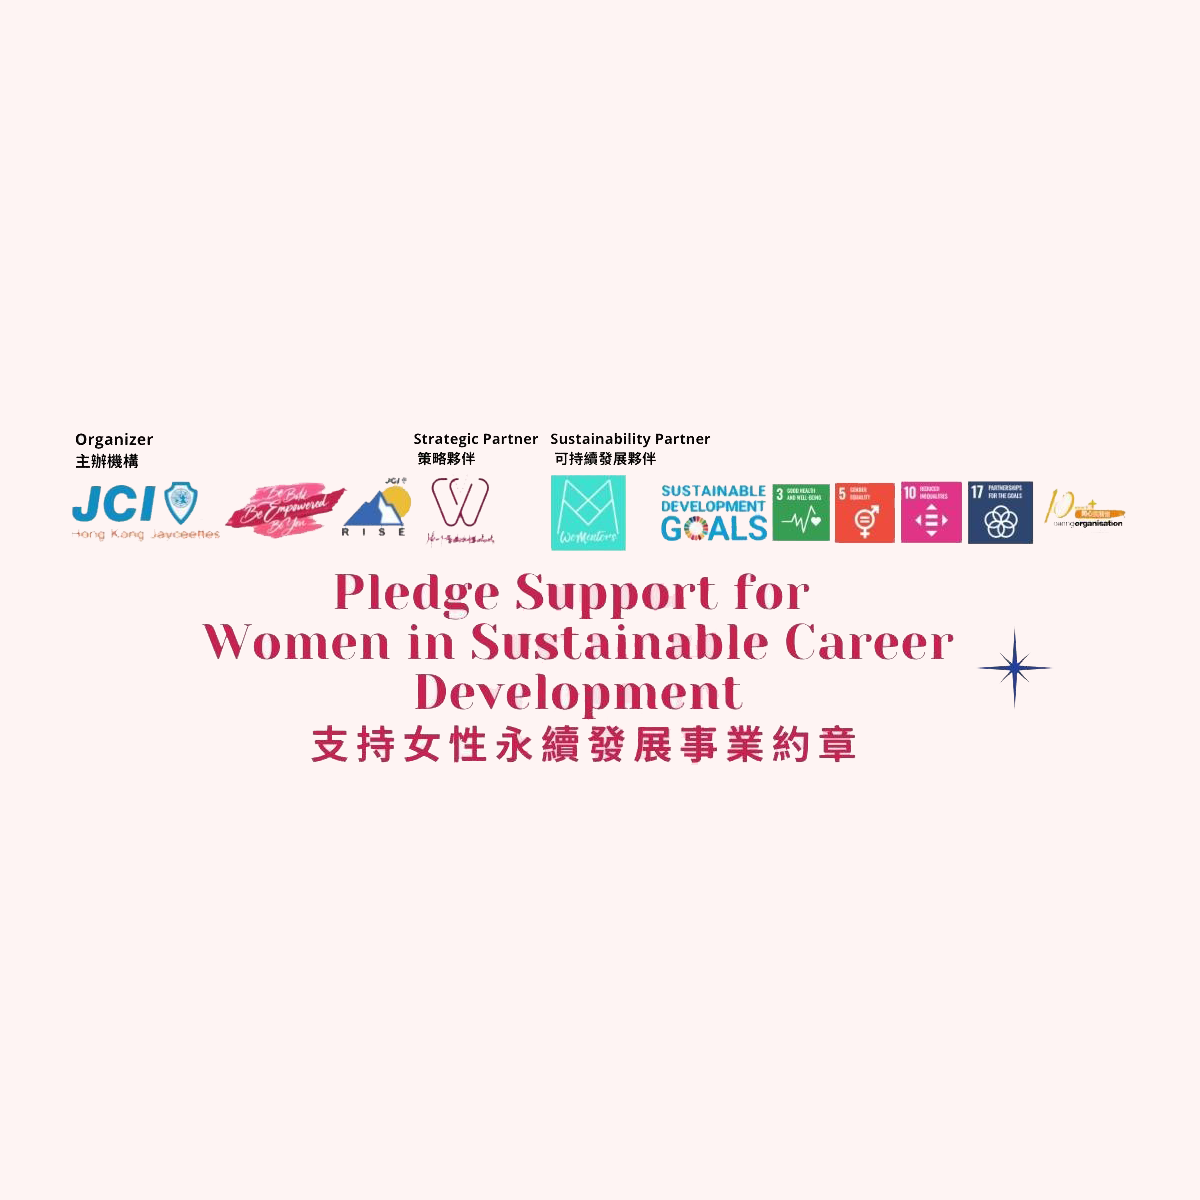 Poster of Pledge Support for Women in Sustainable Development with JCI logo